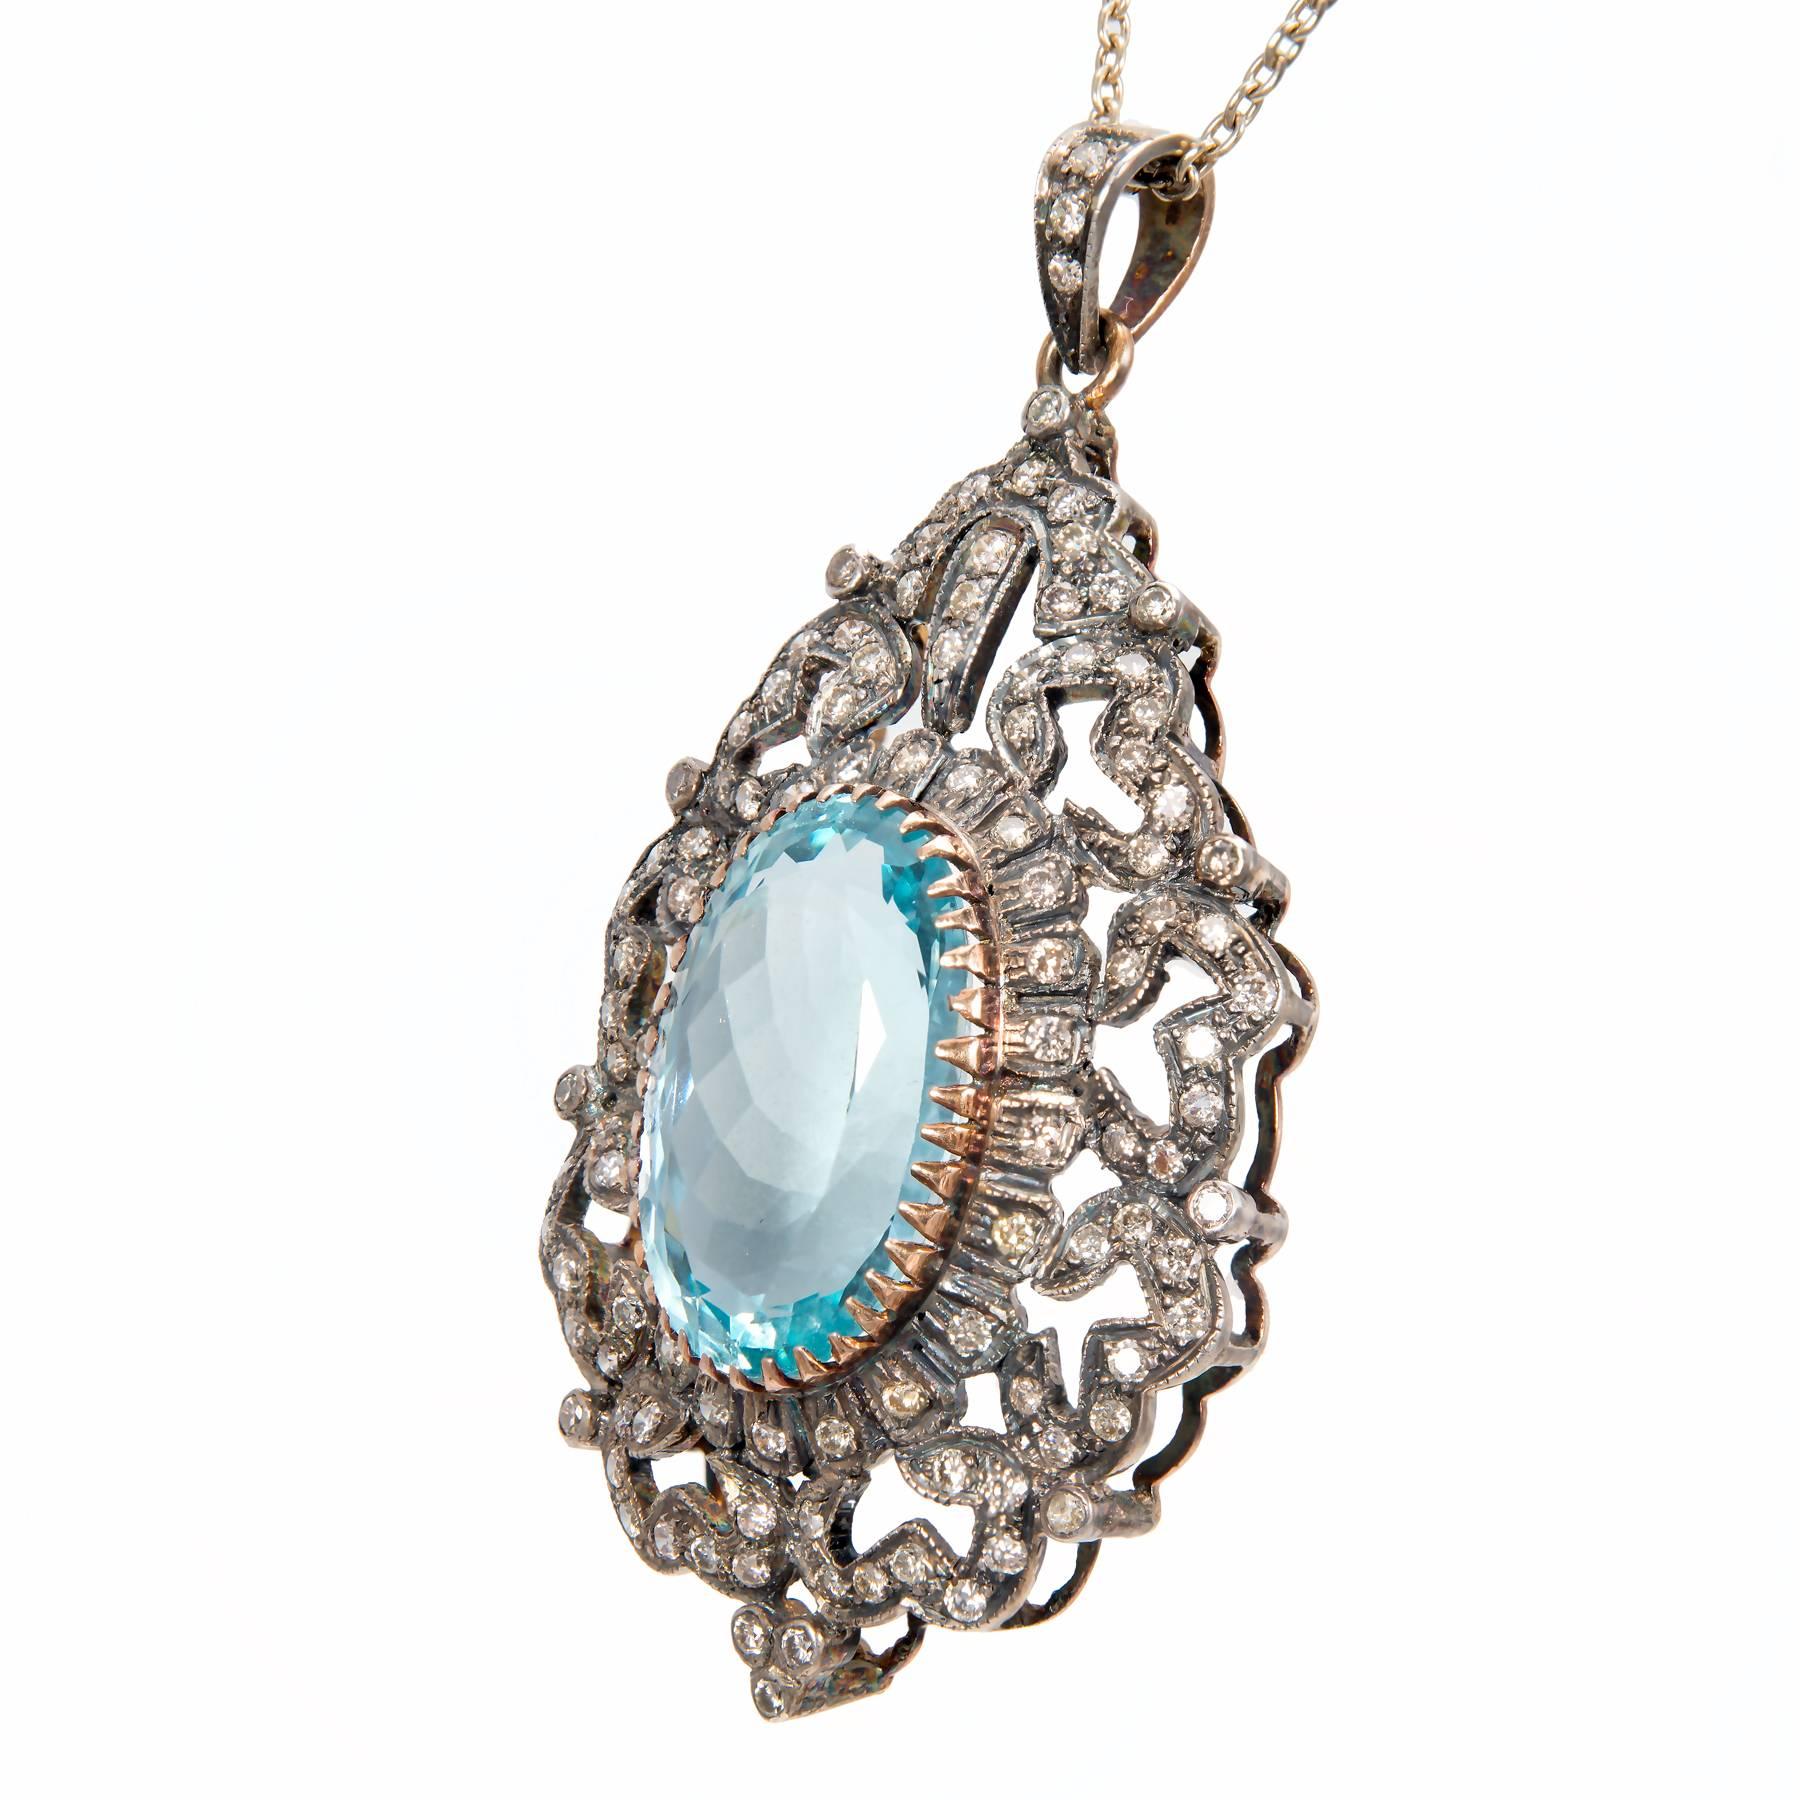 Handmade silver top 14k yellow gold backed pendant. 18k yellow gold bezel. Genuine medium blue Aquamarine in an open work pendant with 116 round accent diamonds. 18k white gold chain all with natural patina. 

1 oval Aquamarine, approx. total weight